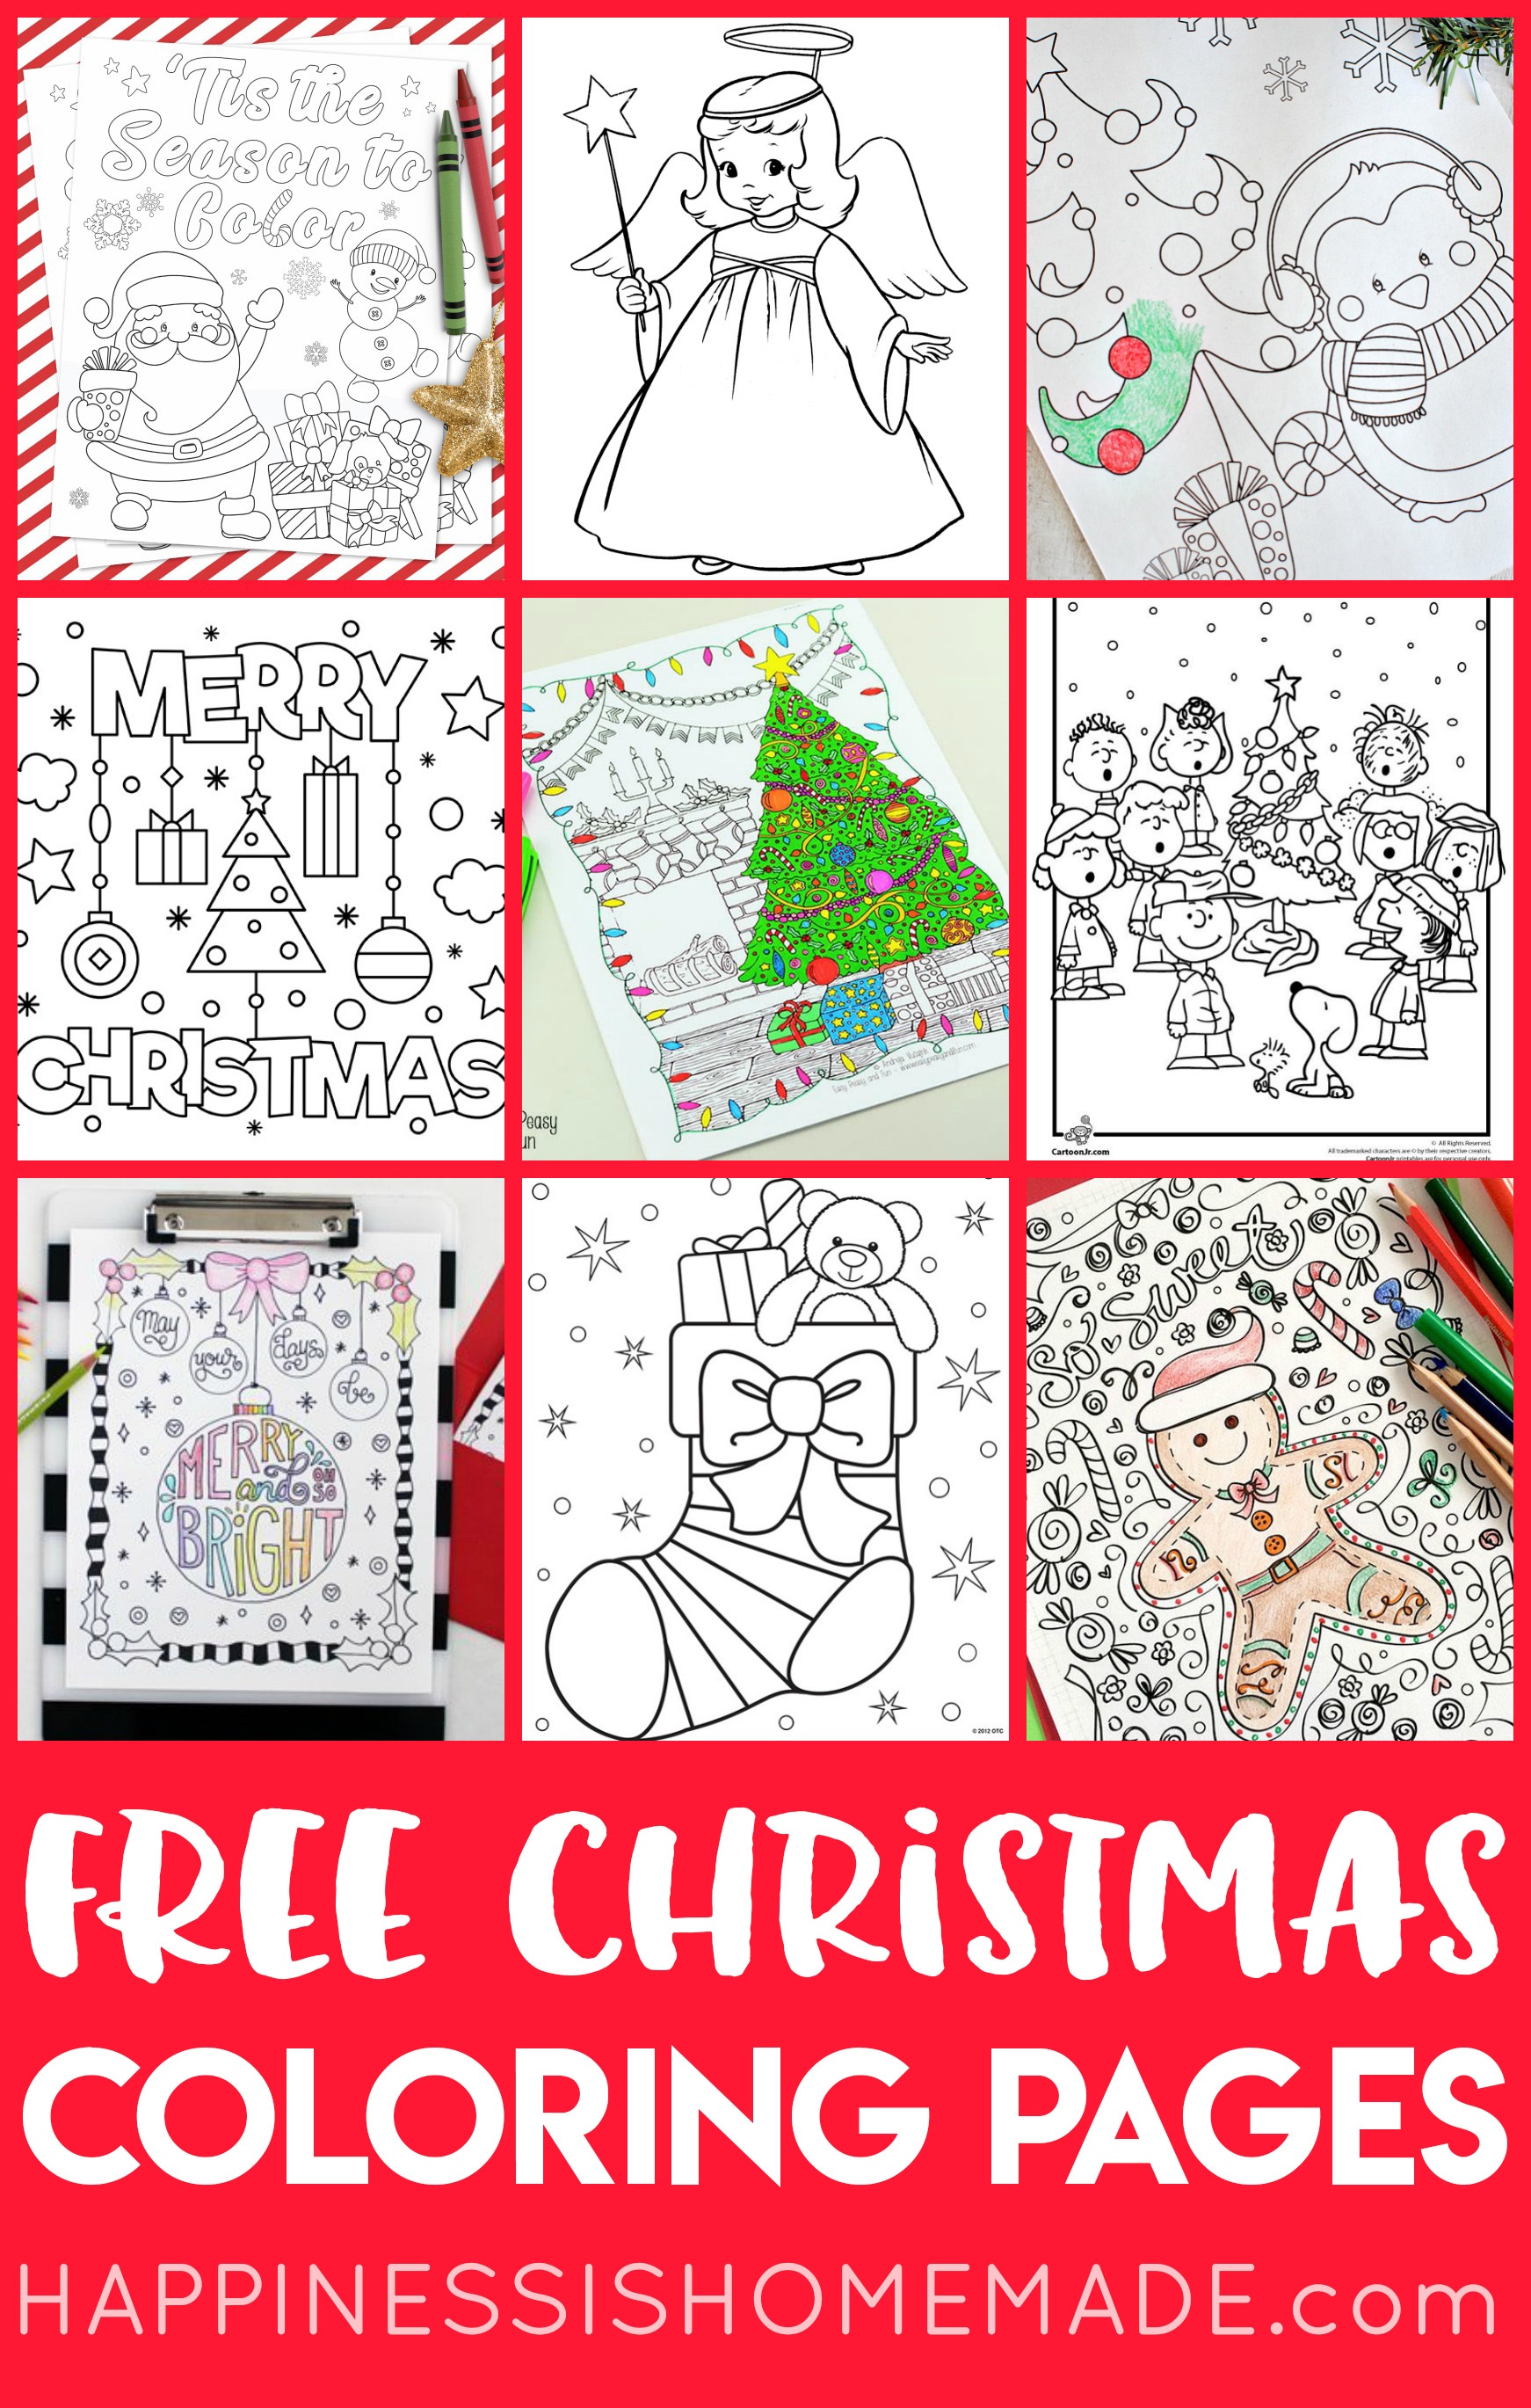 Free Christmas Coloring Pages For Adults And Kids - Happiness Is - Free Printable Christmas Designs